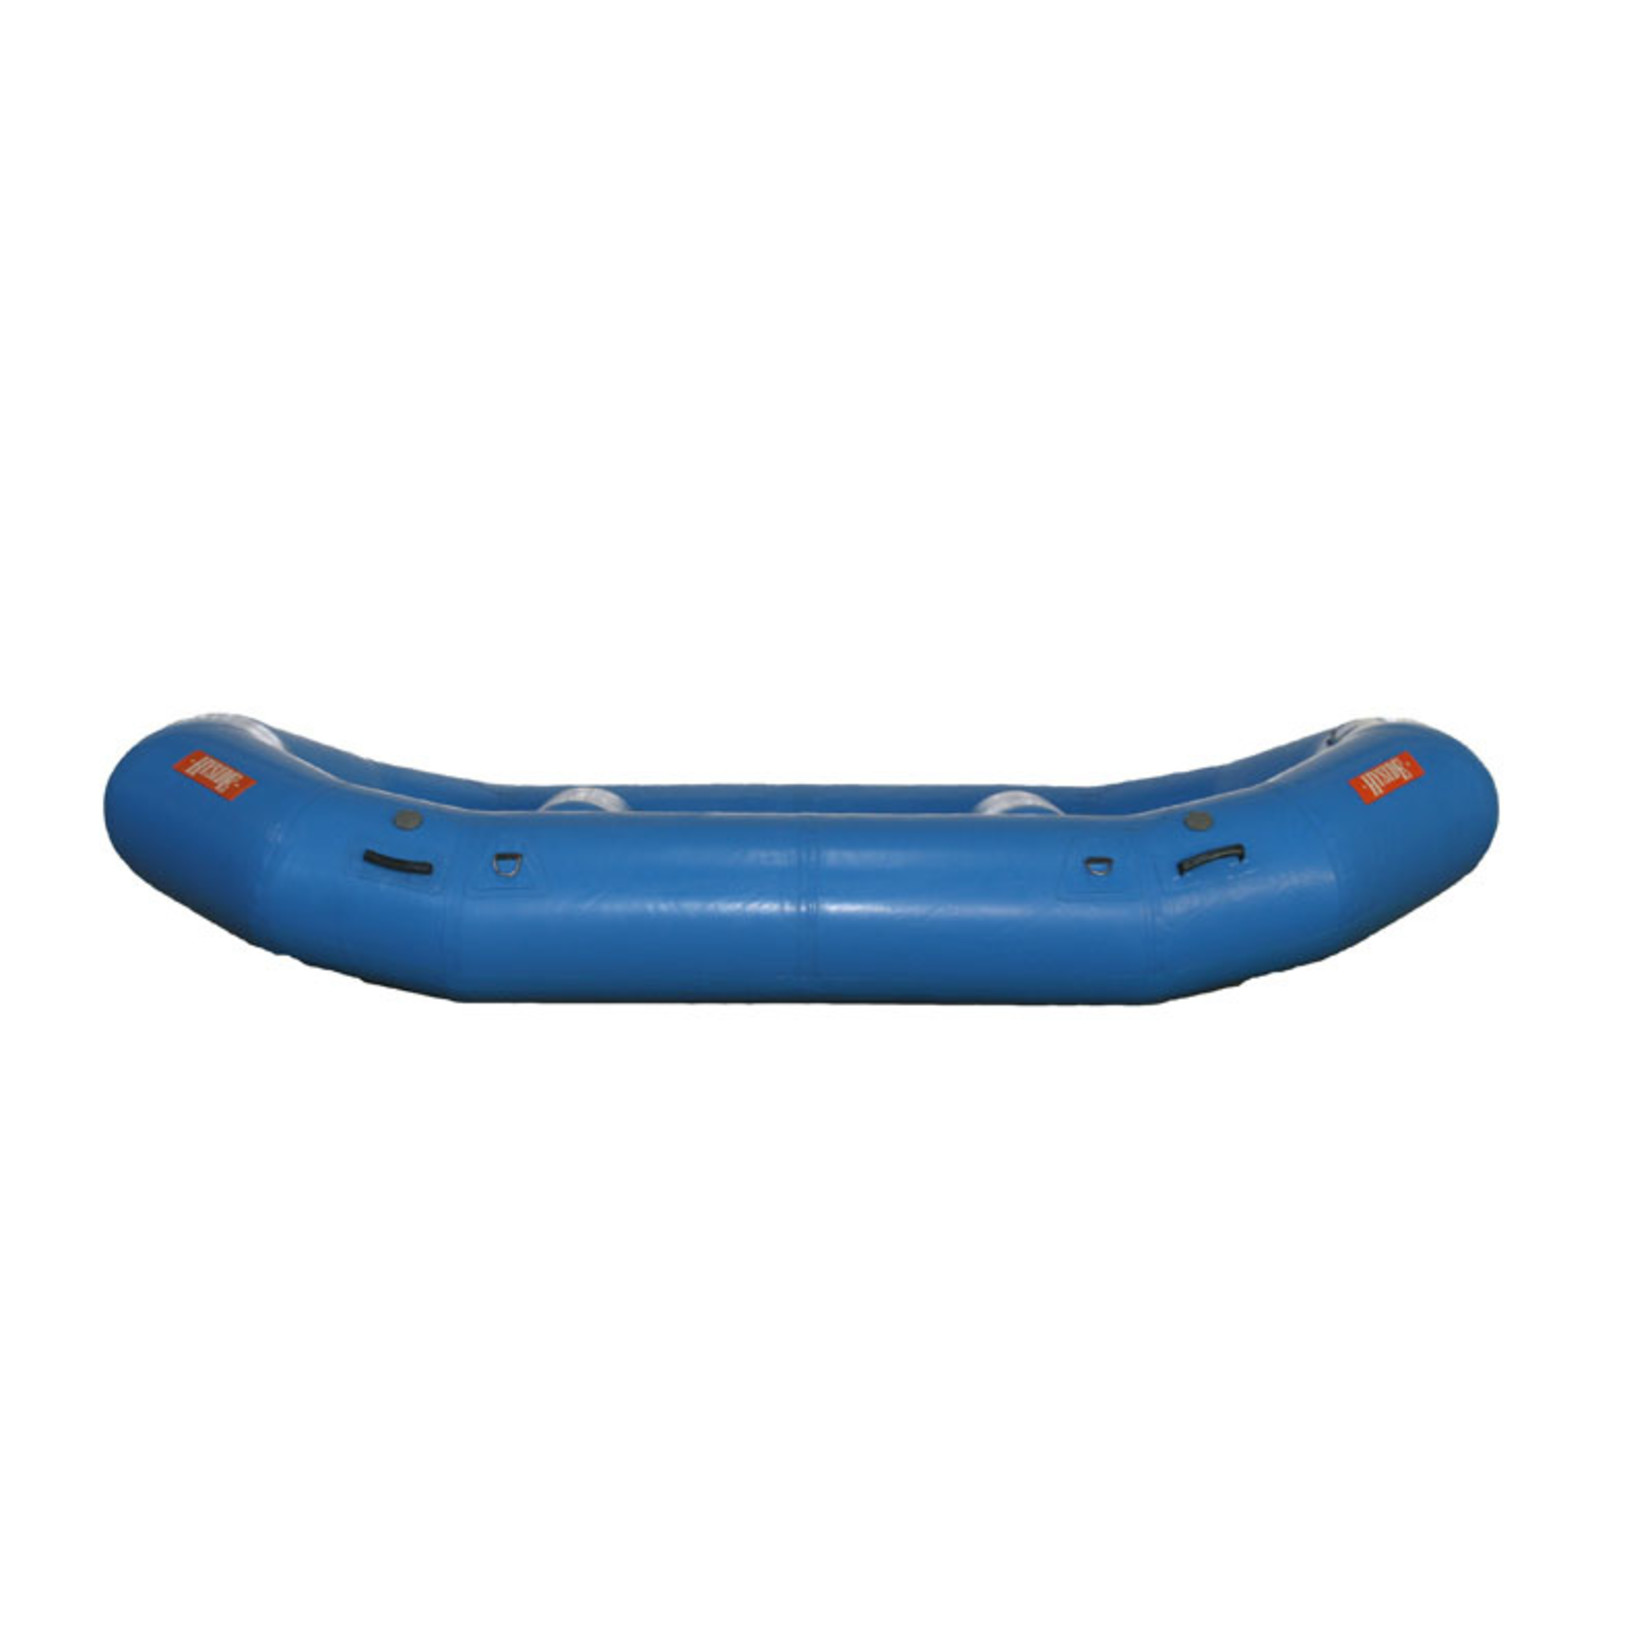 Hyside Inflatables Hyside Outfitter 12.0